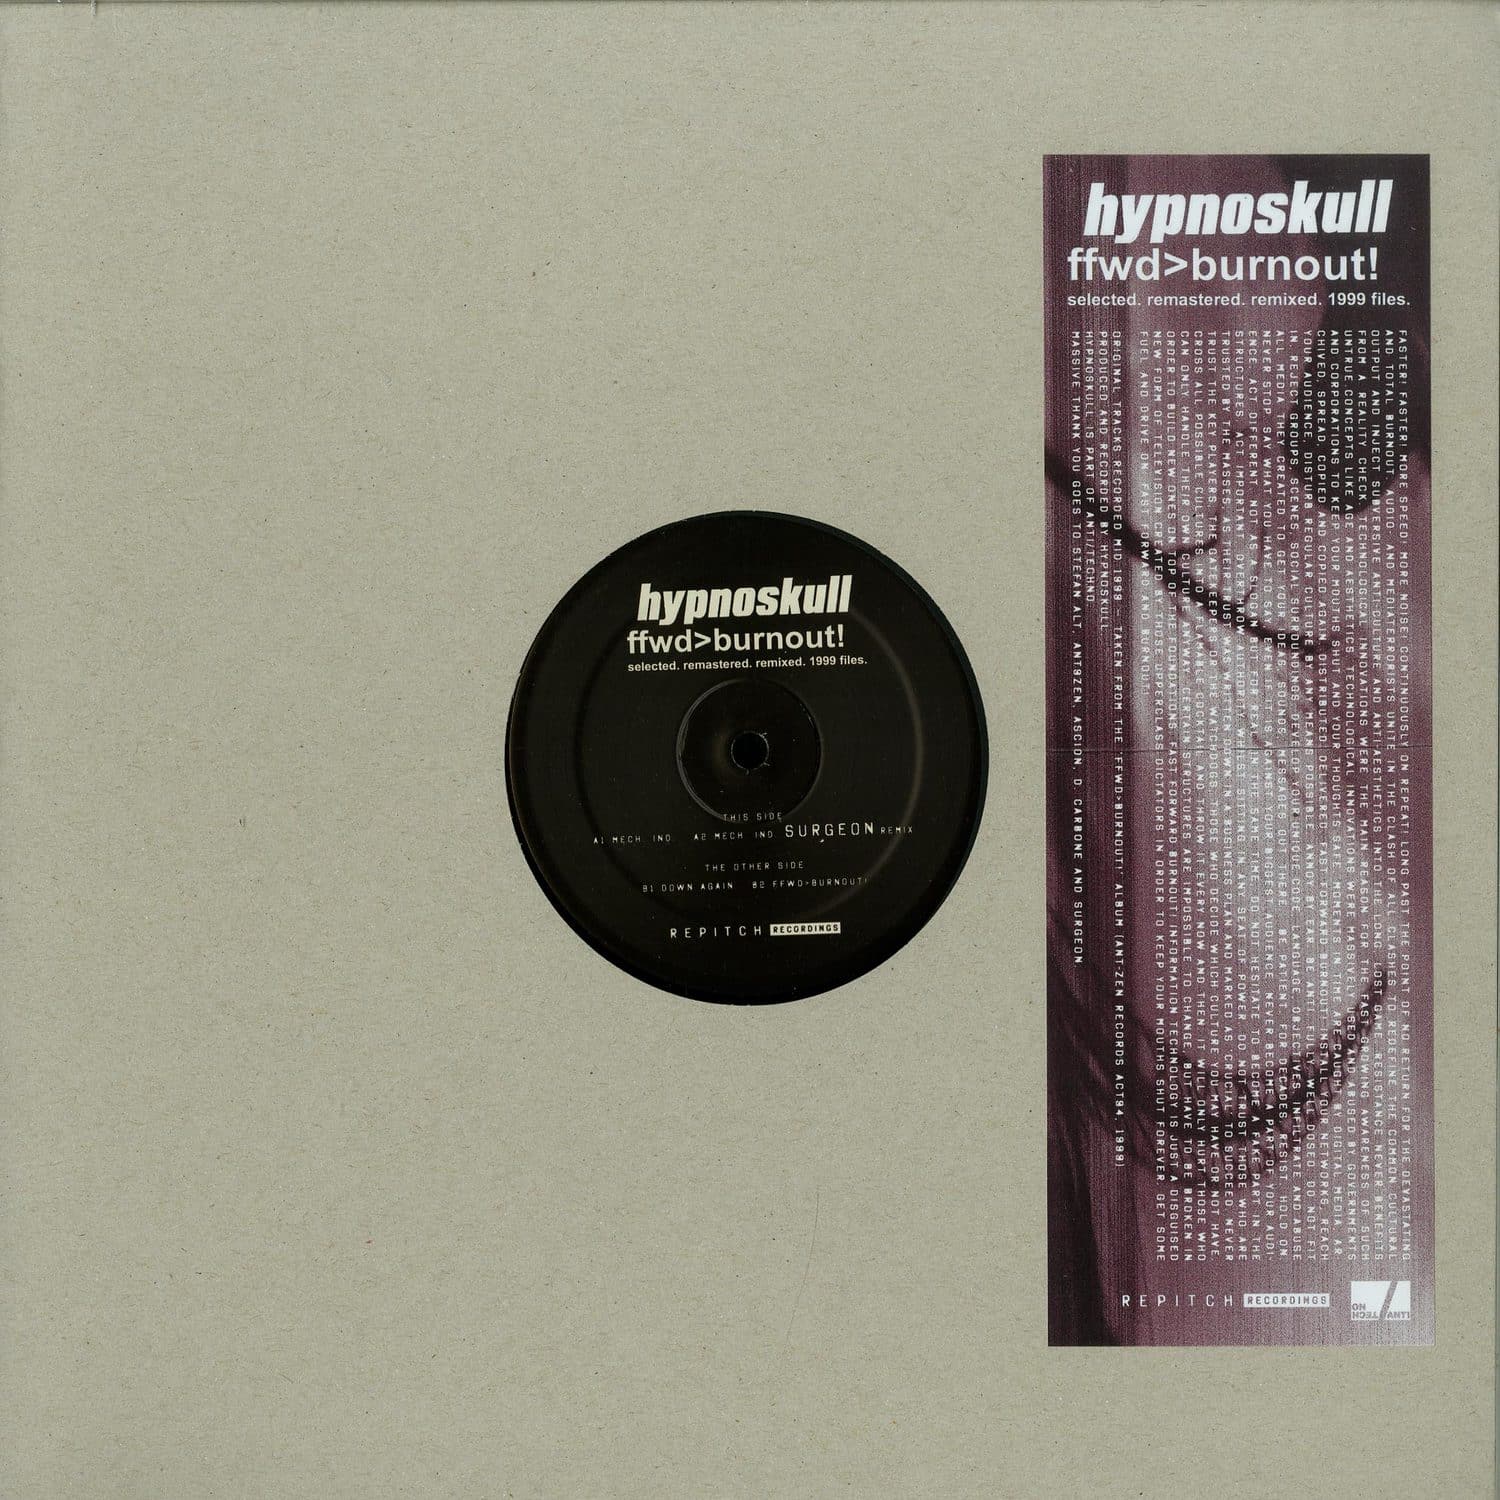 Hypnoskull - ffwd>burnout! selected. remastered. remixed. 1999 files w/ Surgeon Remix